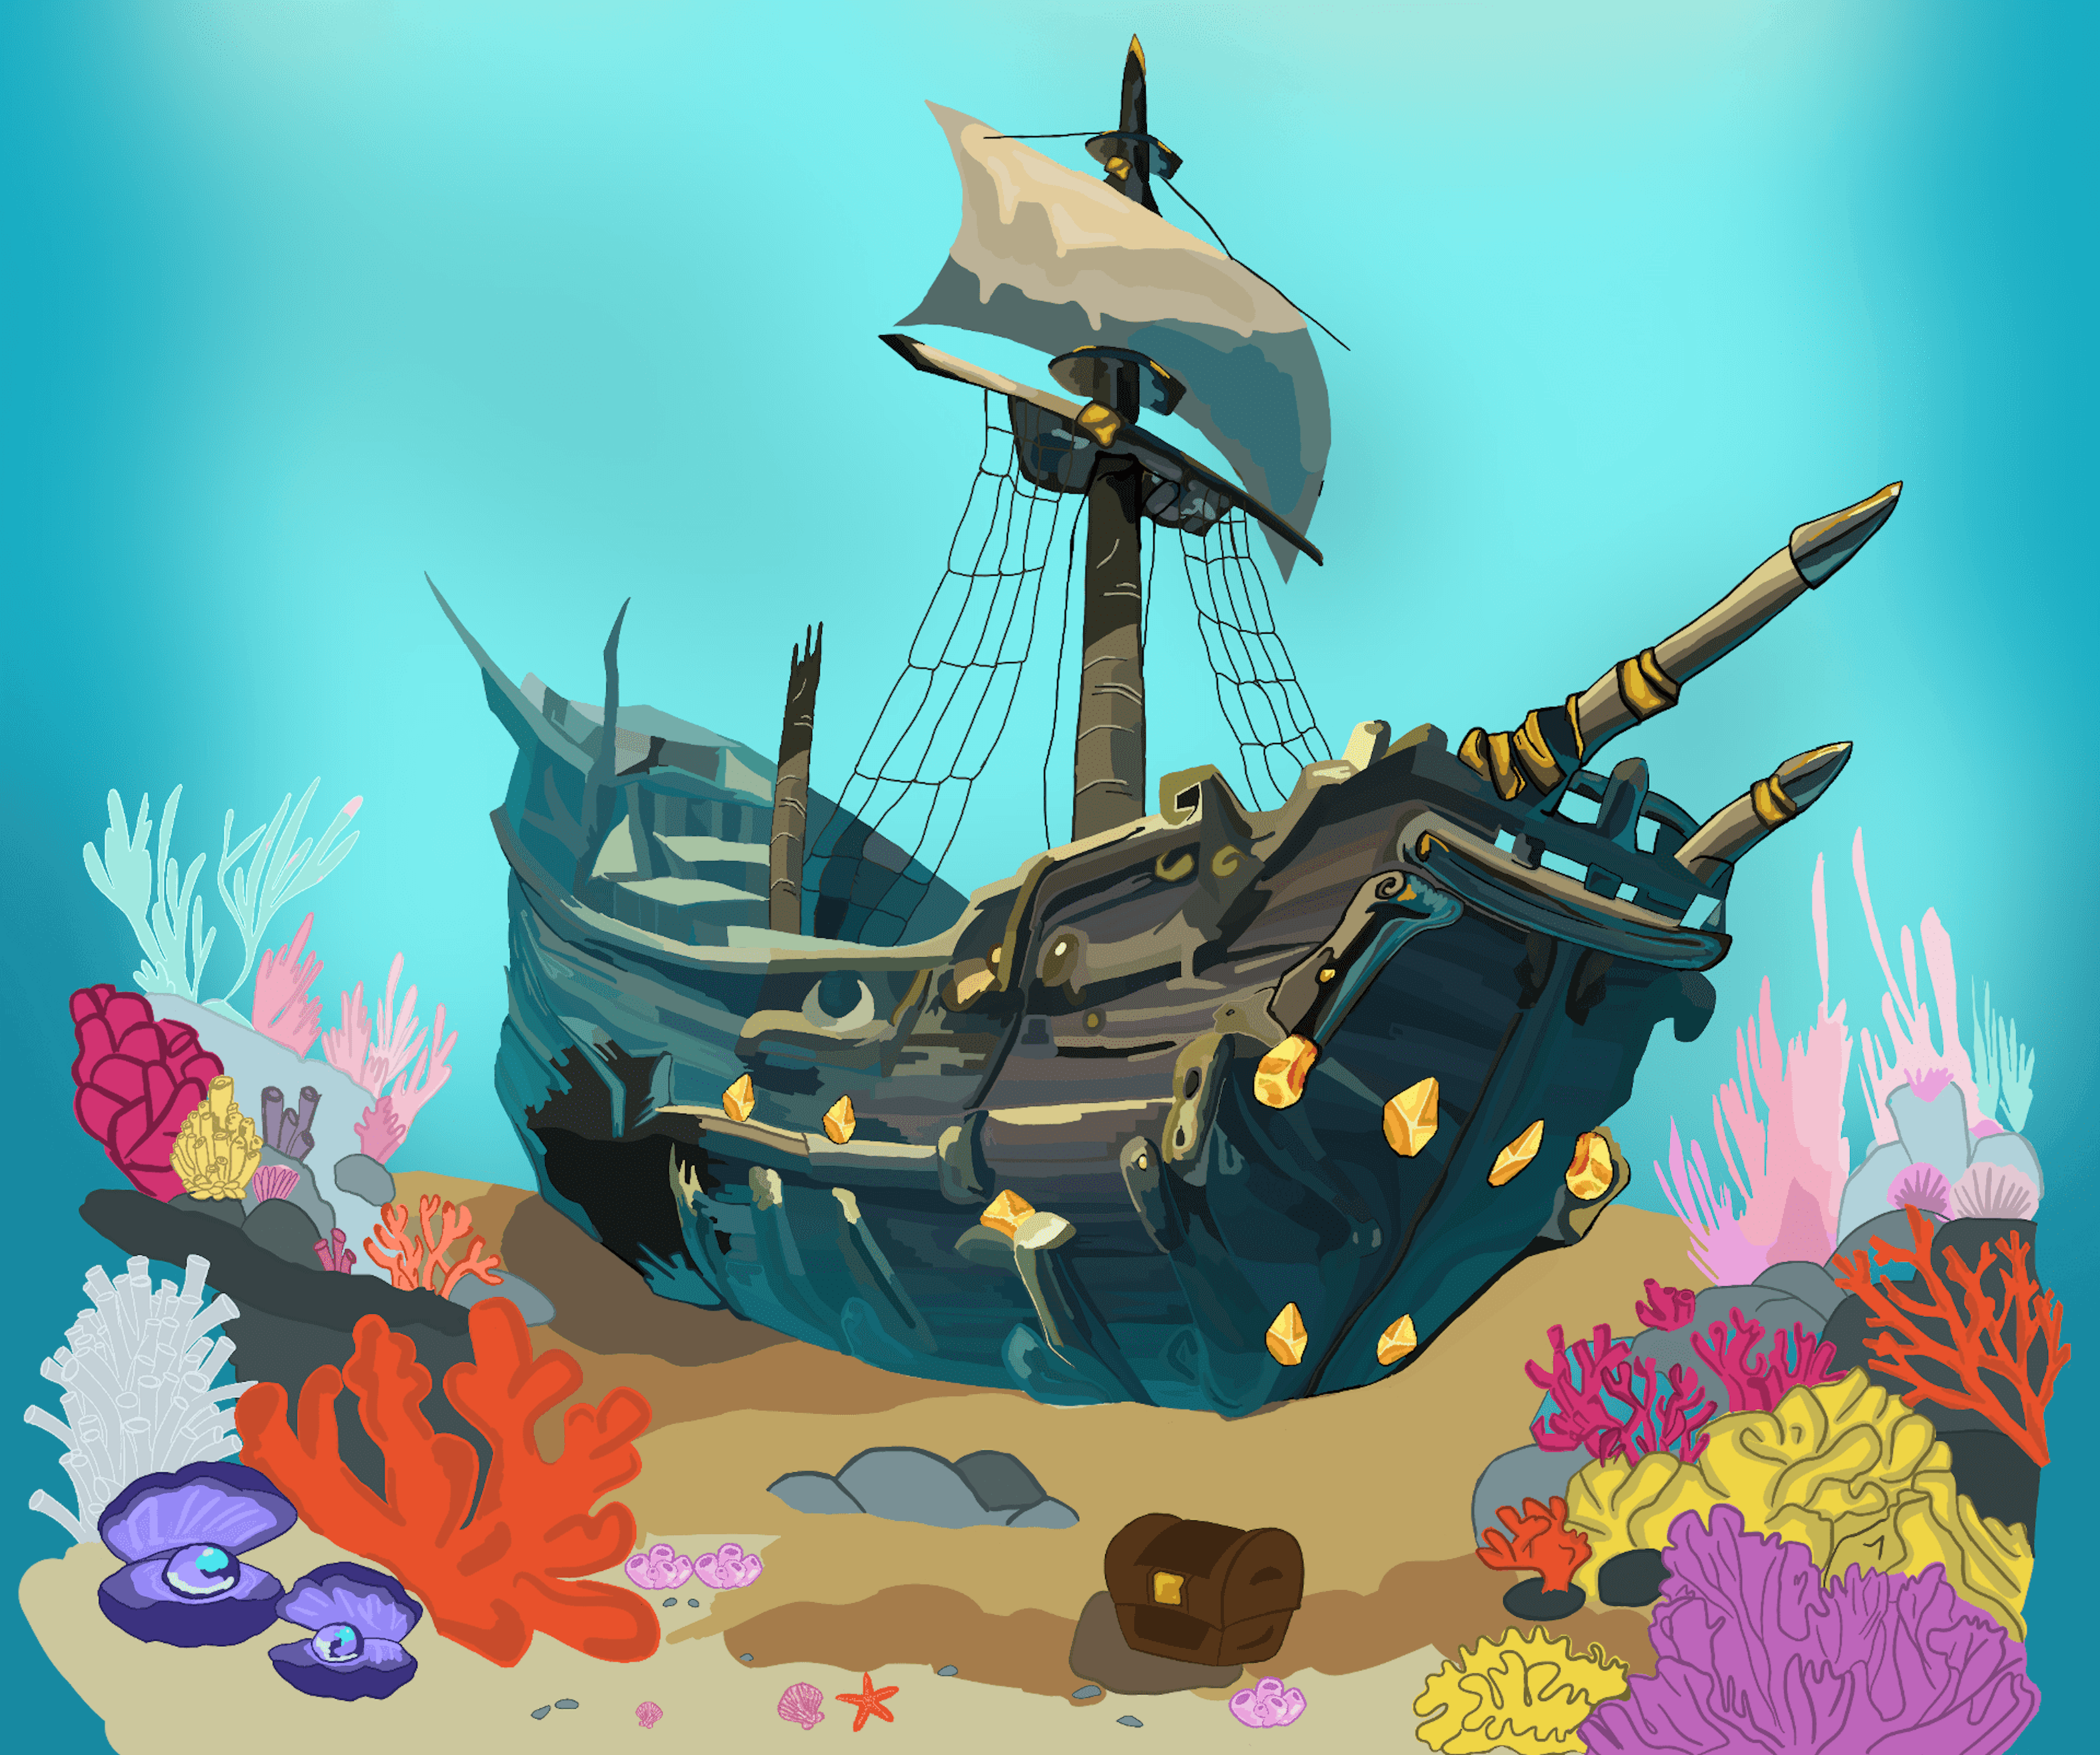 A vibrant and detailed portrayal of the immersive environment specifically designed for the Shipwreck Cookie character. Bright colours were used for the coral and bluish hues were used for the ship to emphasise its underwater setting.